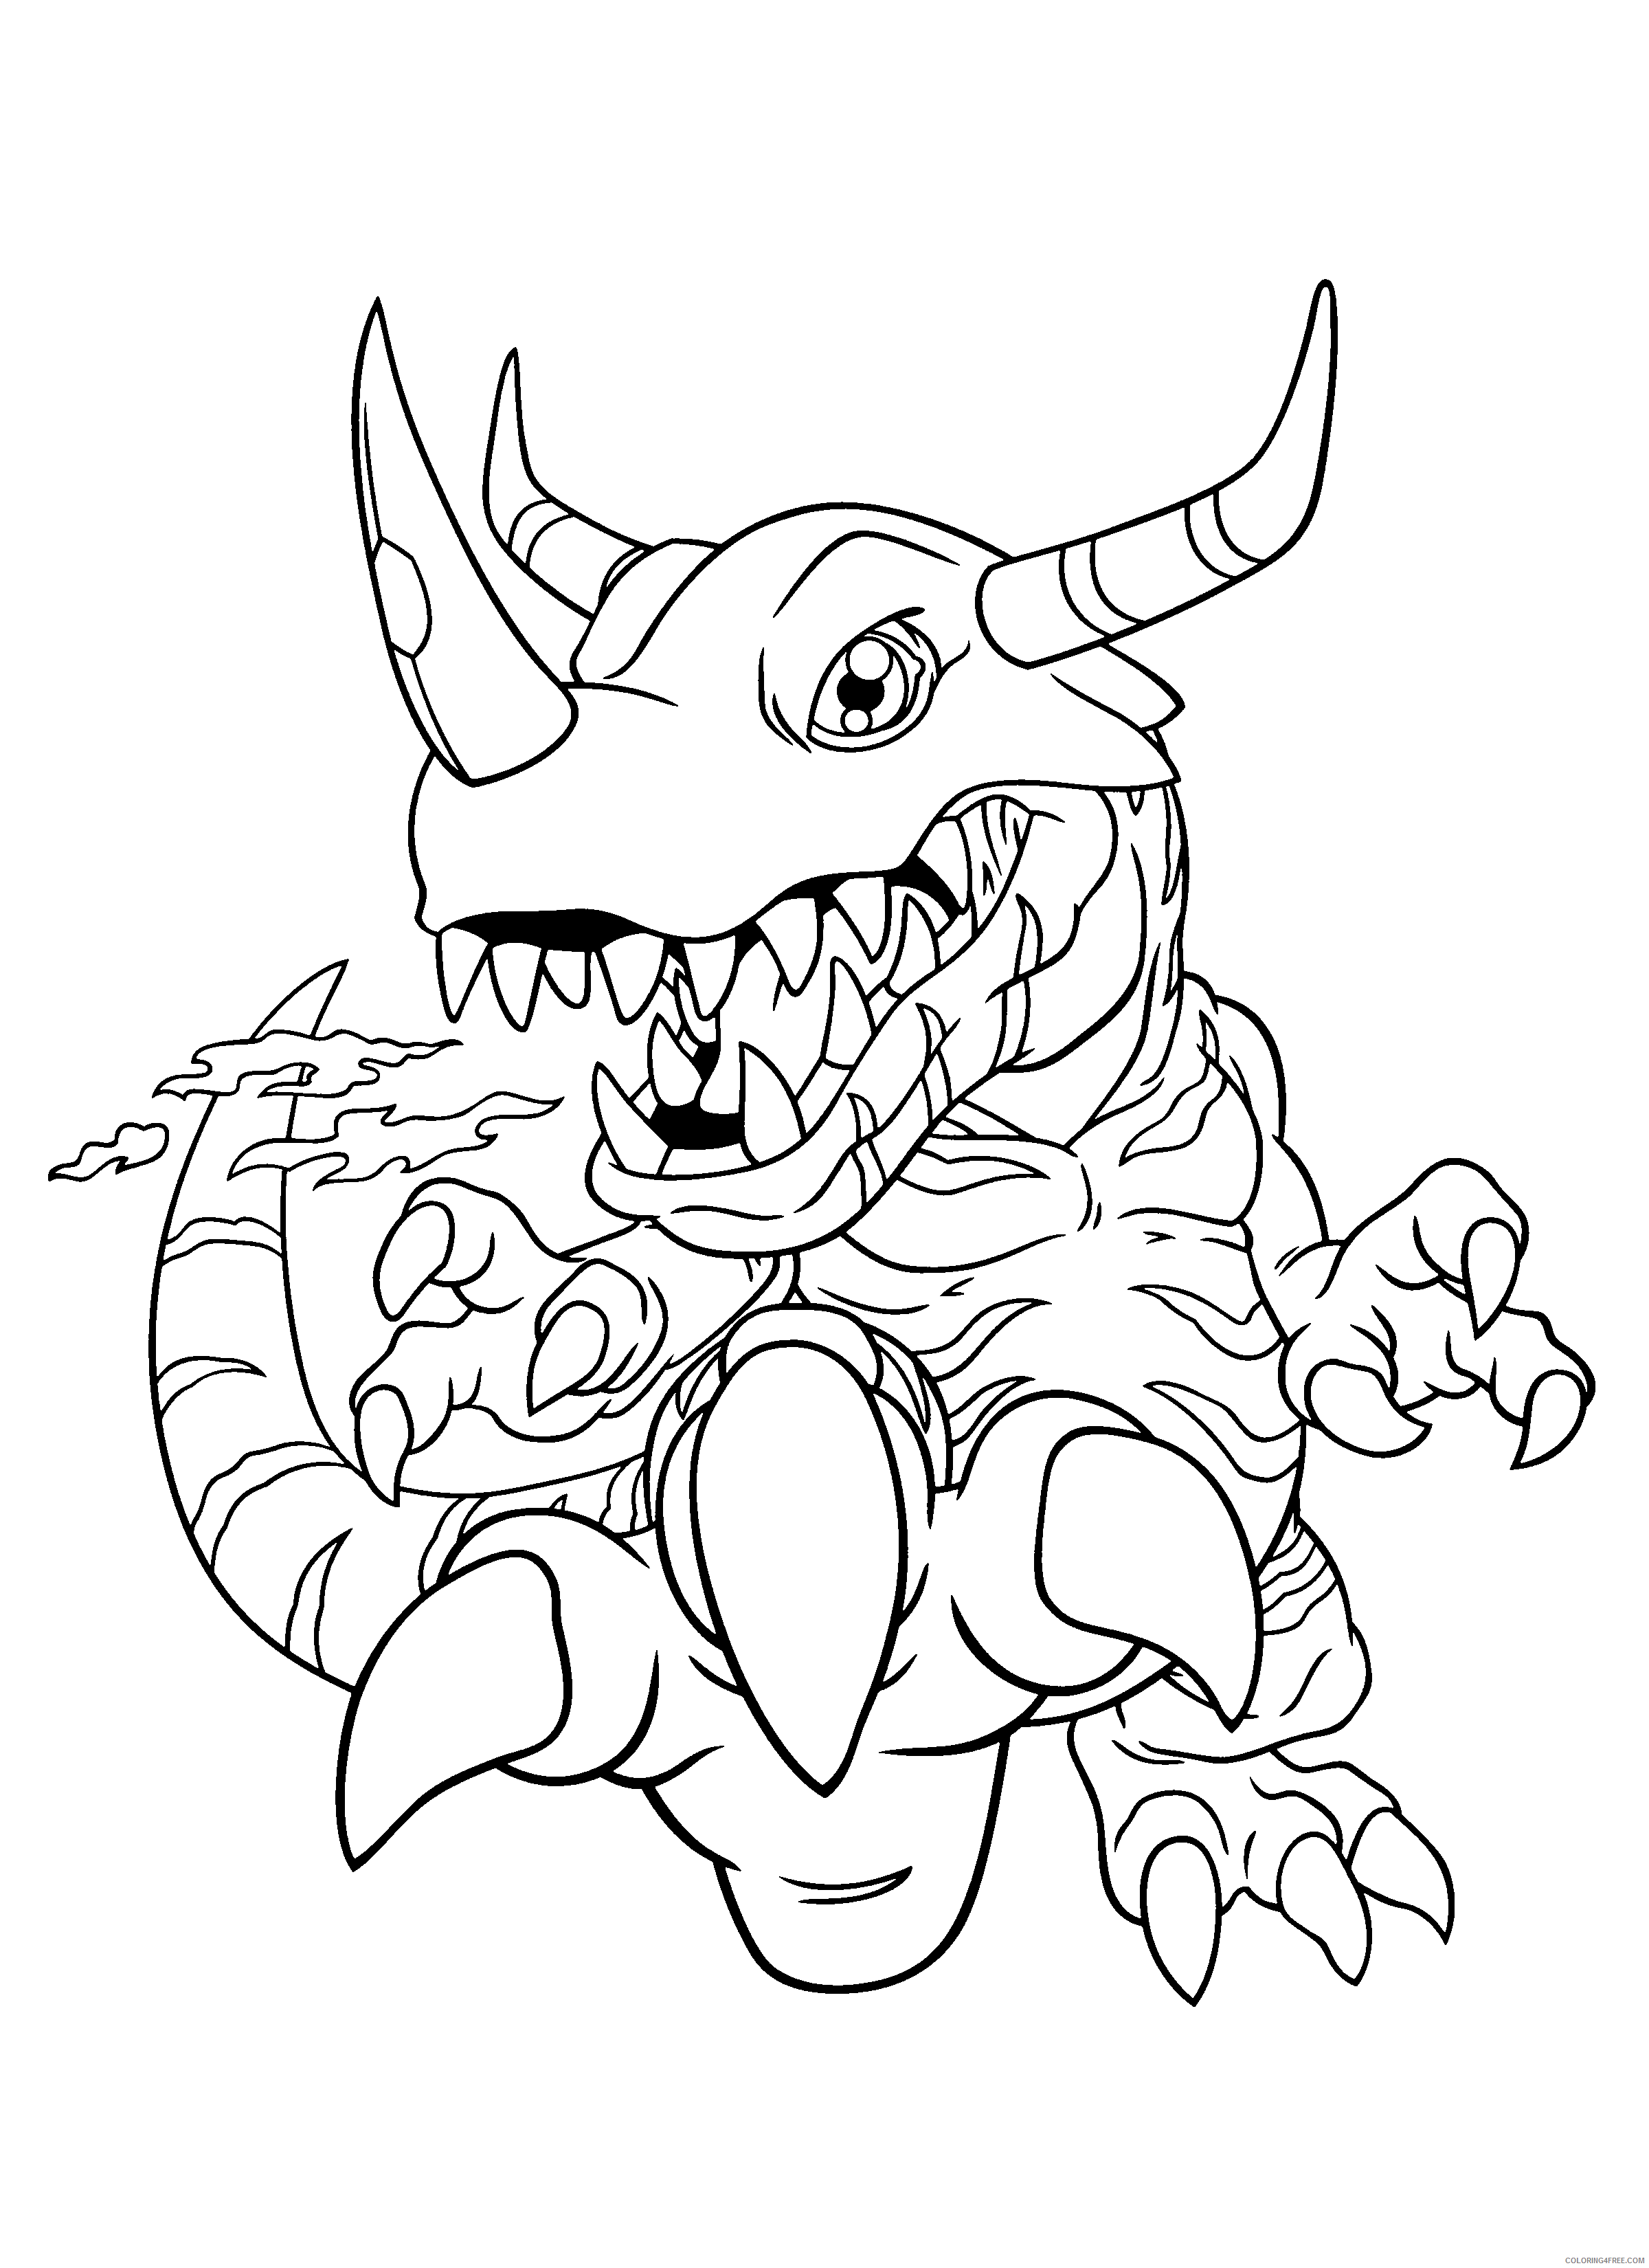 Digimon Printable Coloring Pages Anime digimon 164 2021 0253 Coloring4free